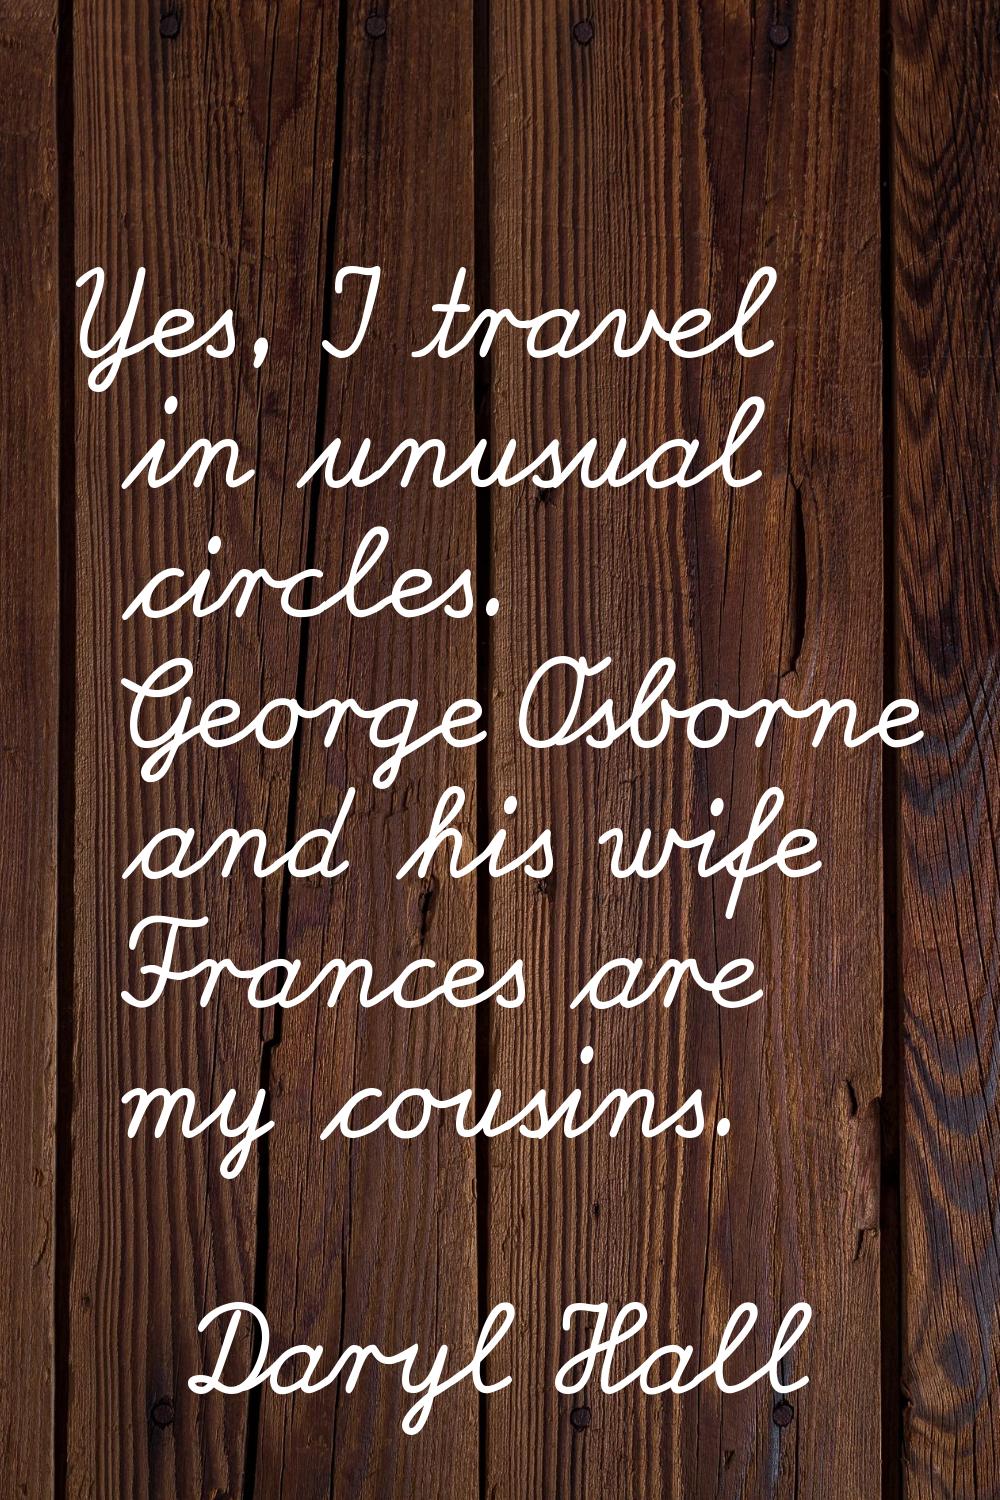 Yes, I travel in unusual circles. George Osborne and his wife Frances are my cousins.